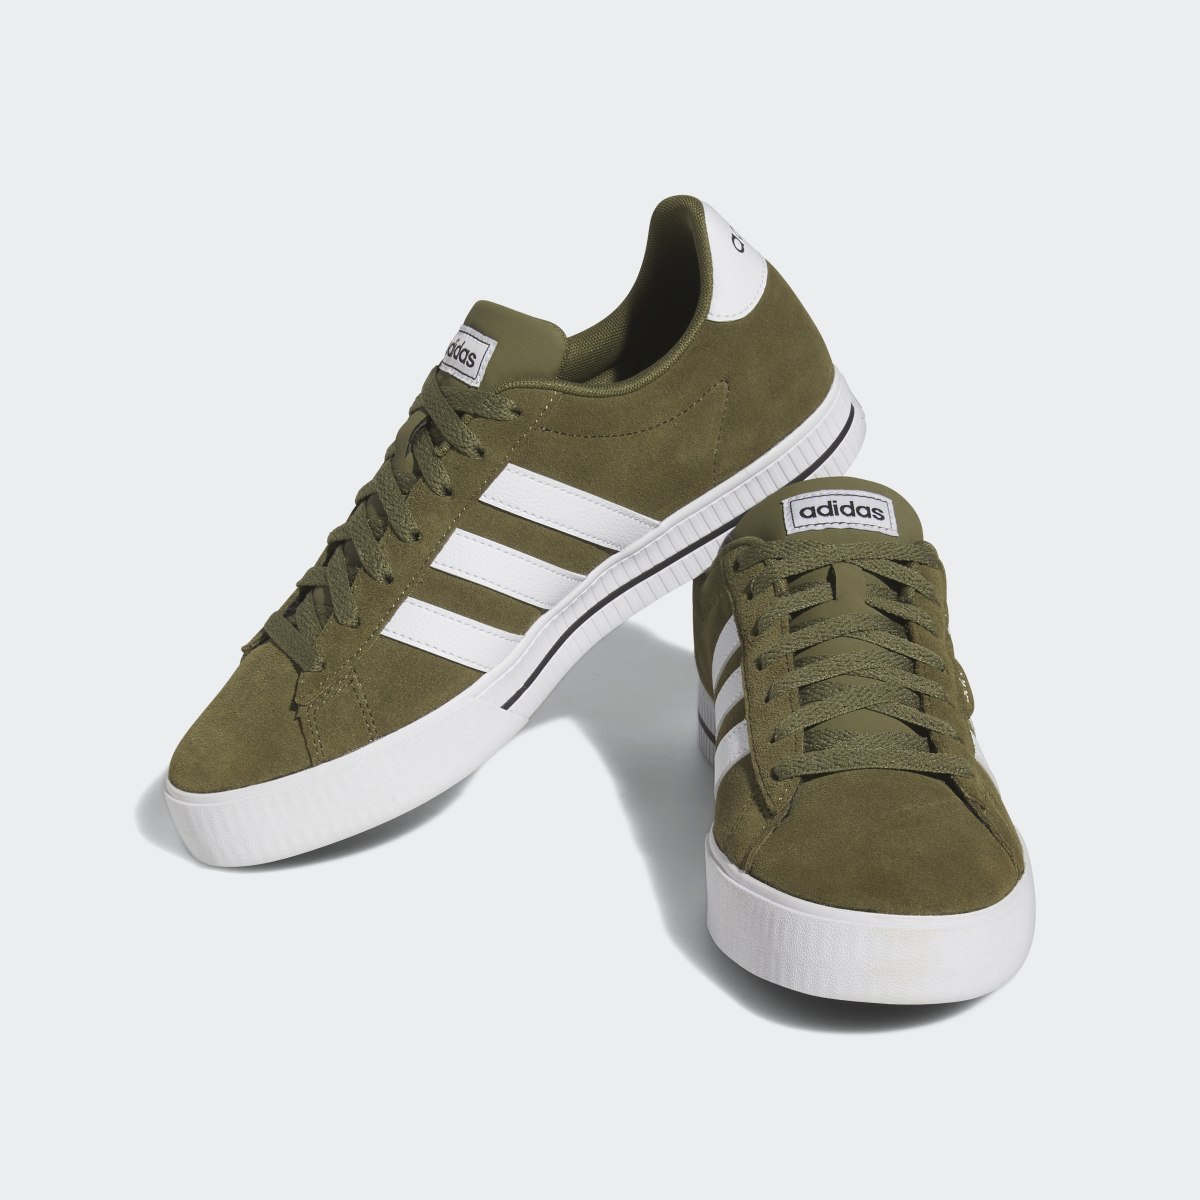 Adidas Daily 3.0 Shoes. 5